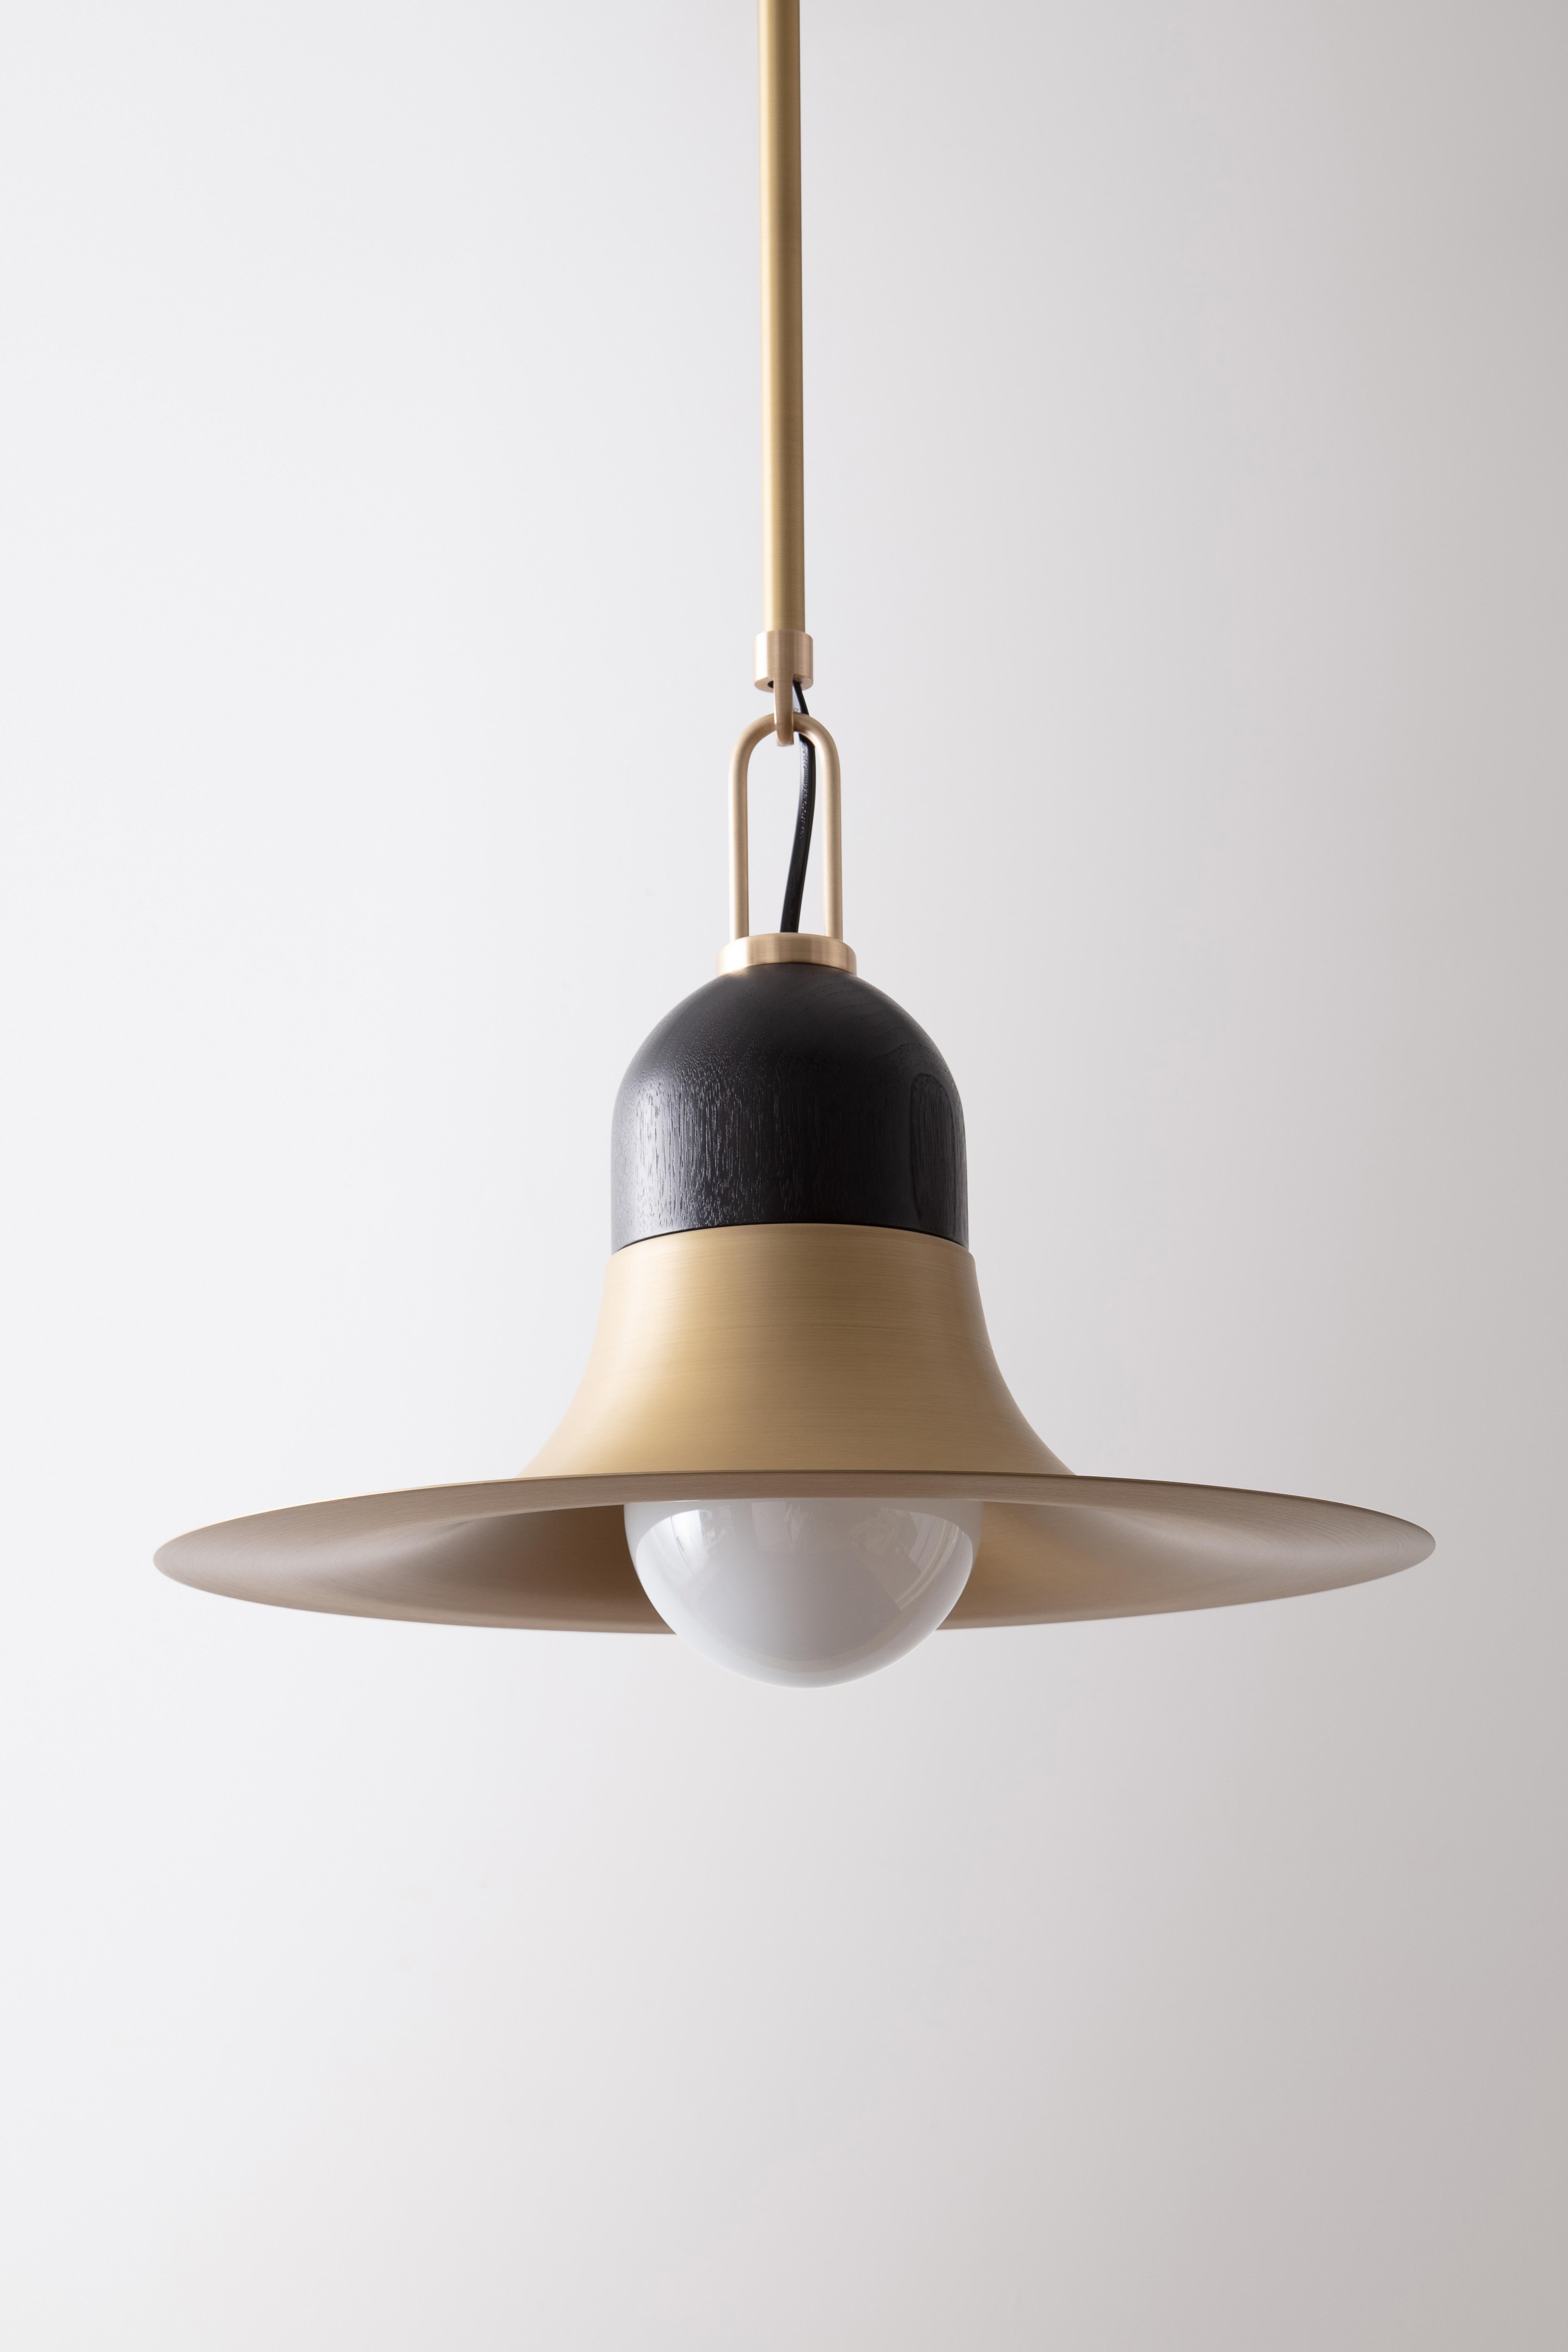 The Pommer pendant features a trumpet-like shade available in contrasting metal and wood finishes. The graceful dome shape smoothly transitions between materials. Ornamentation is found in the form, rather than applied to the surface. Metal and wood